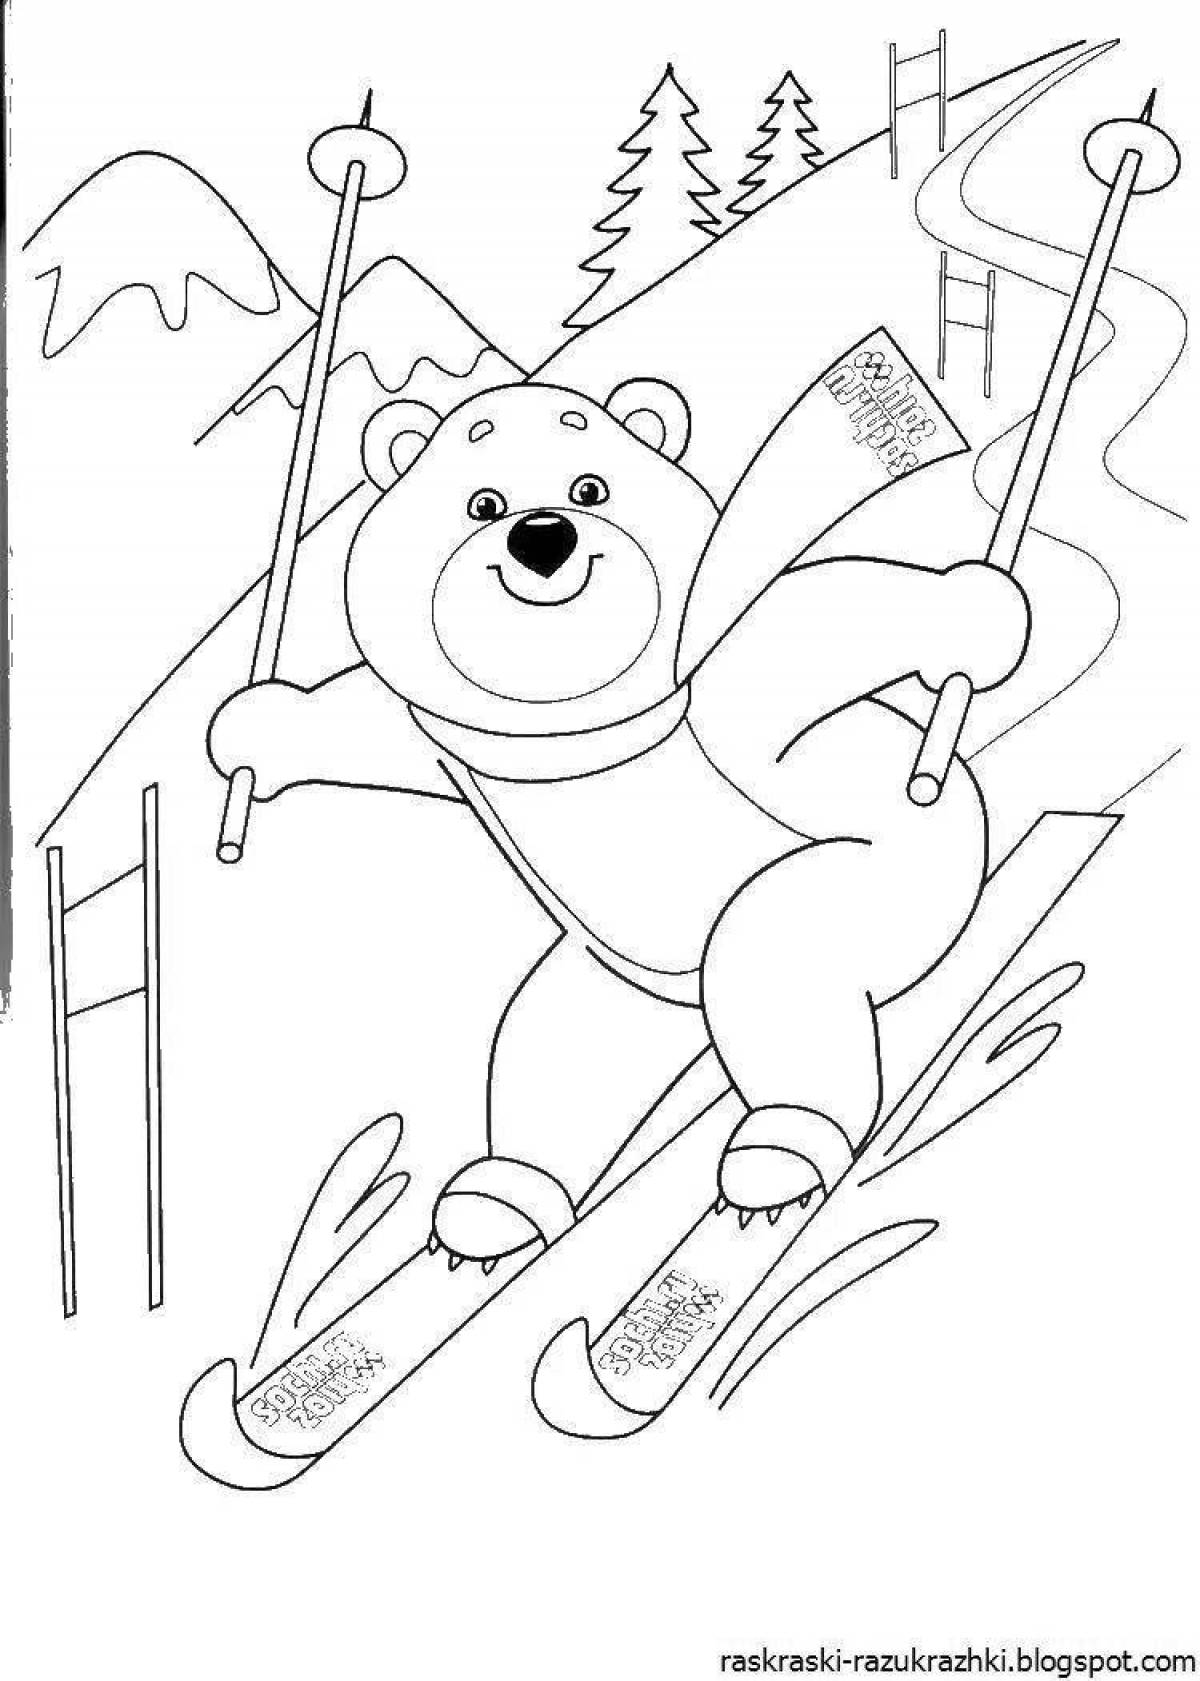 Large coloring book for children's olympic sports